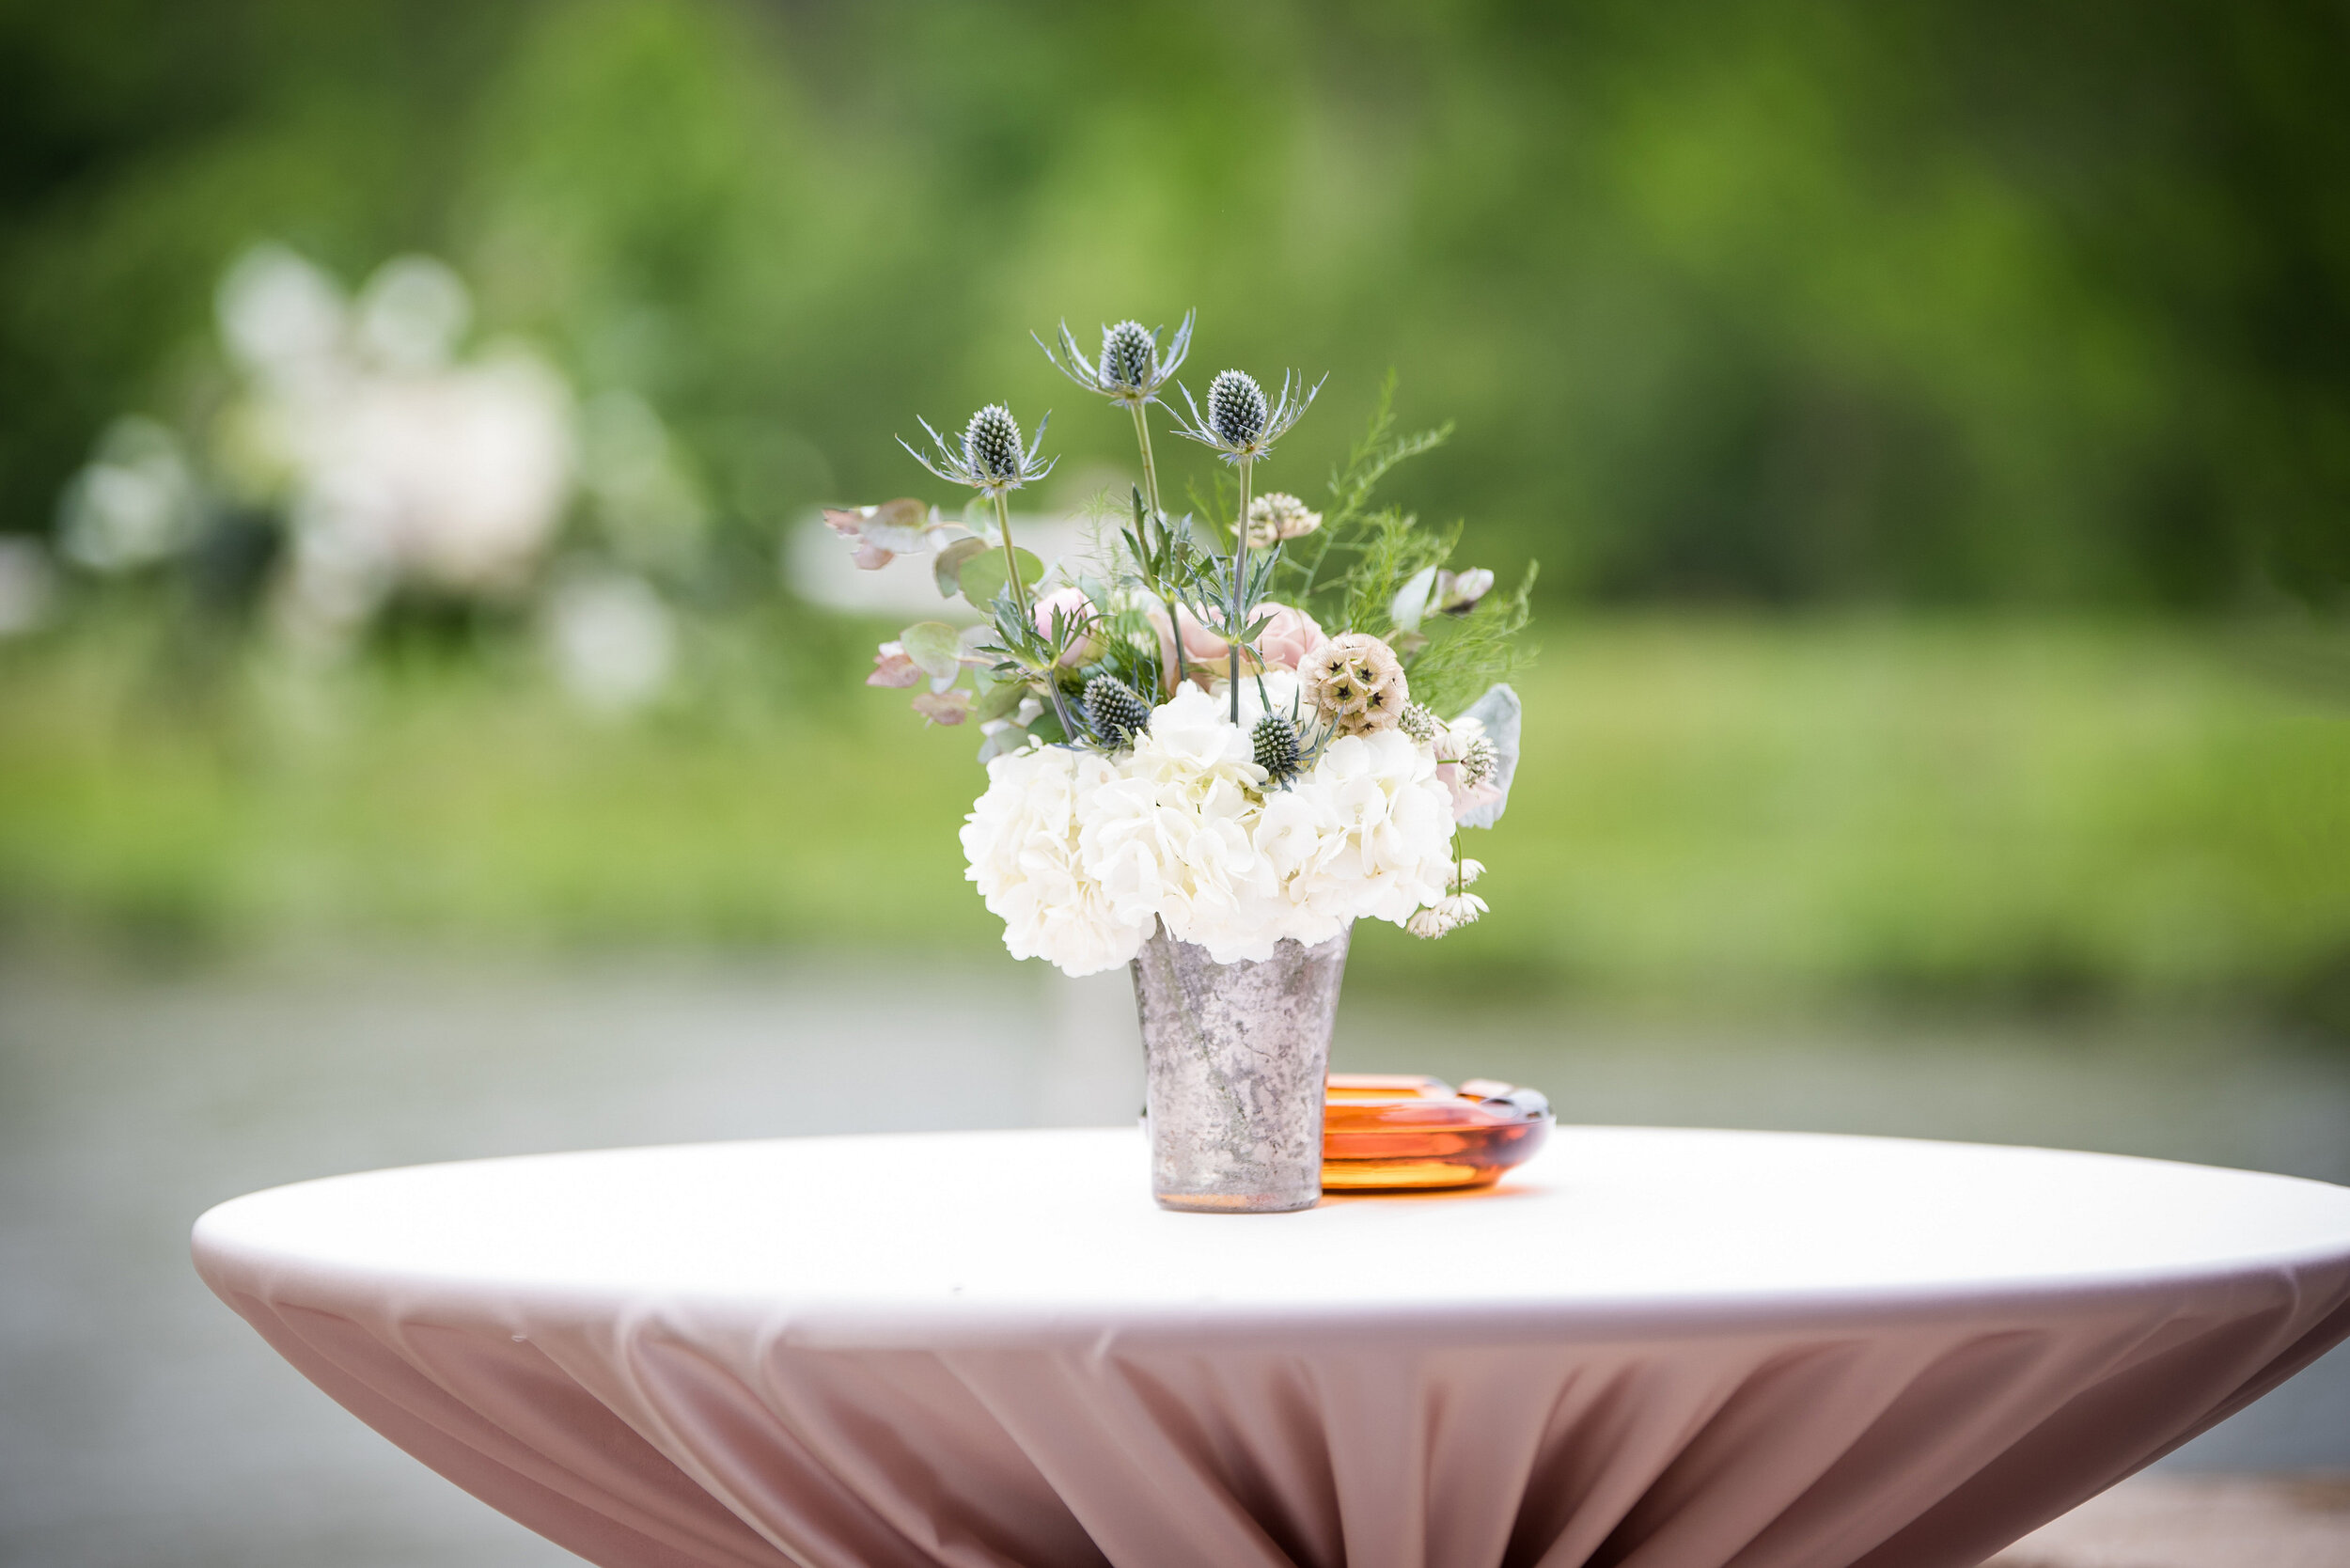 Intimate Garden Party Wedding captured by Inspired Eye Photography featured on CHI thee WED